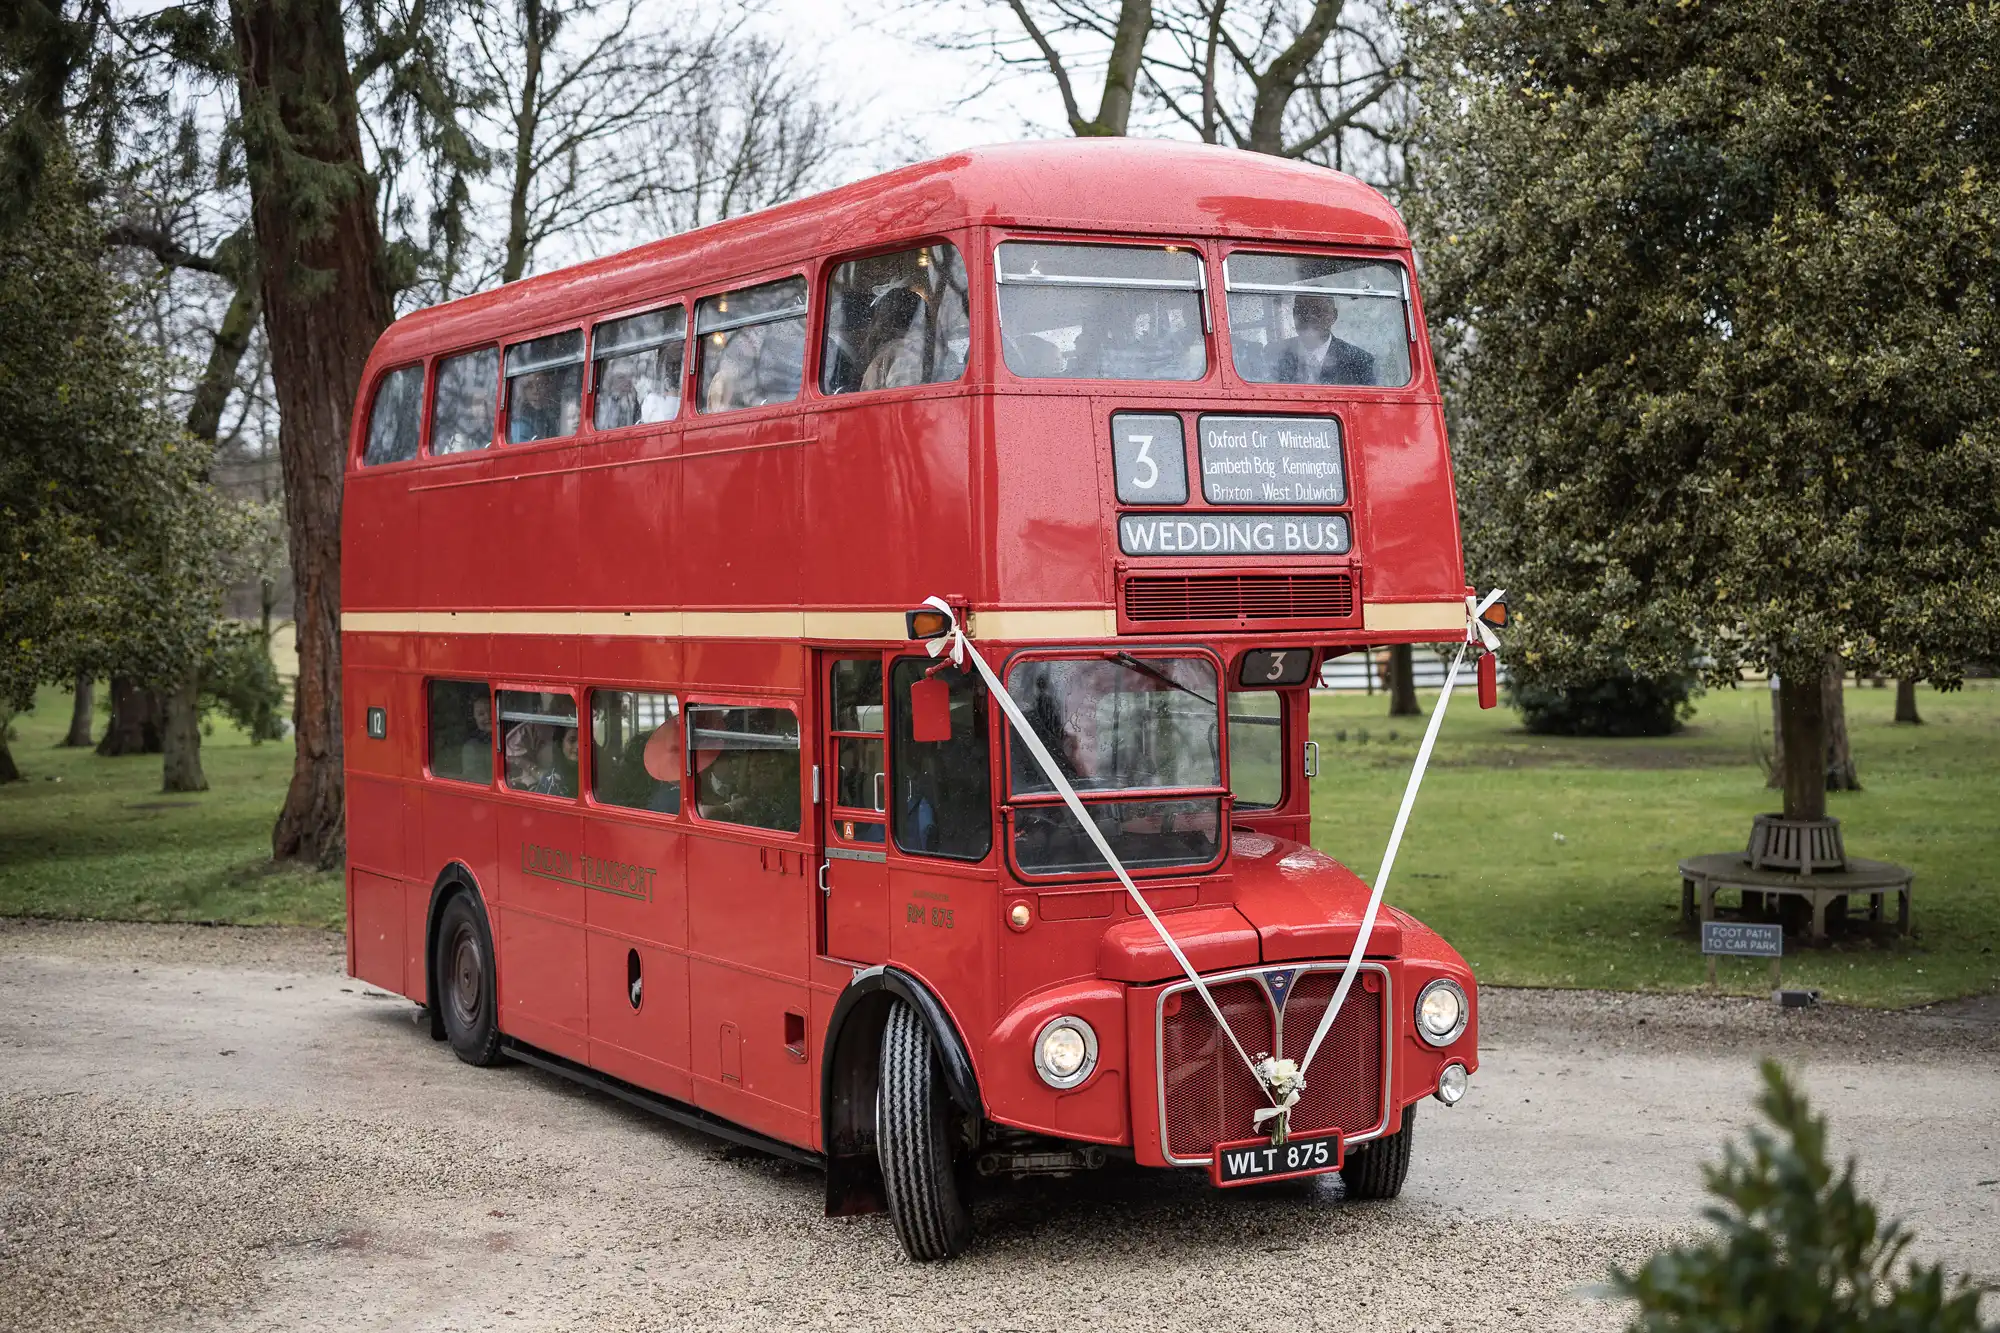 A red double-decker bus with a "Wedding Bus" sign on the front, parked on a gravel path in a park-like setting with trees and greenery in the background.